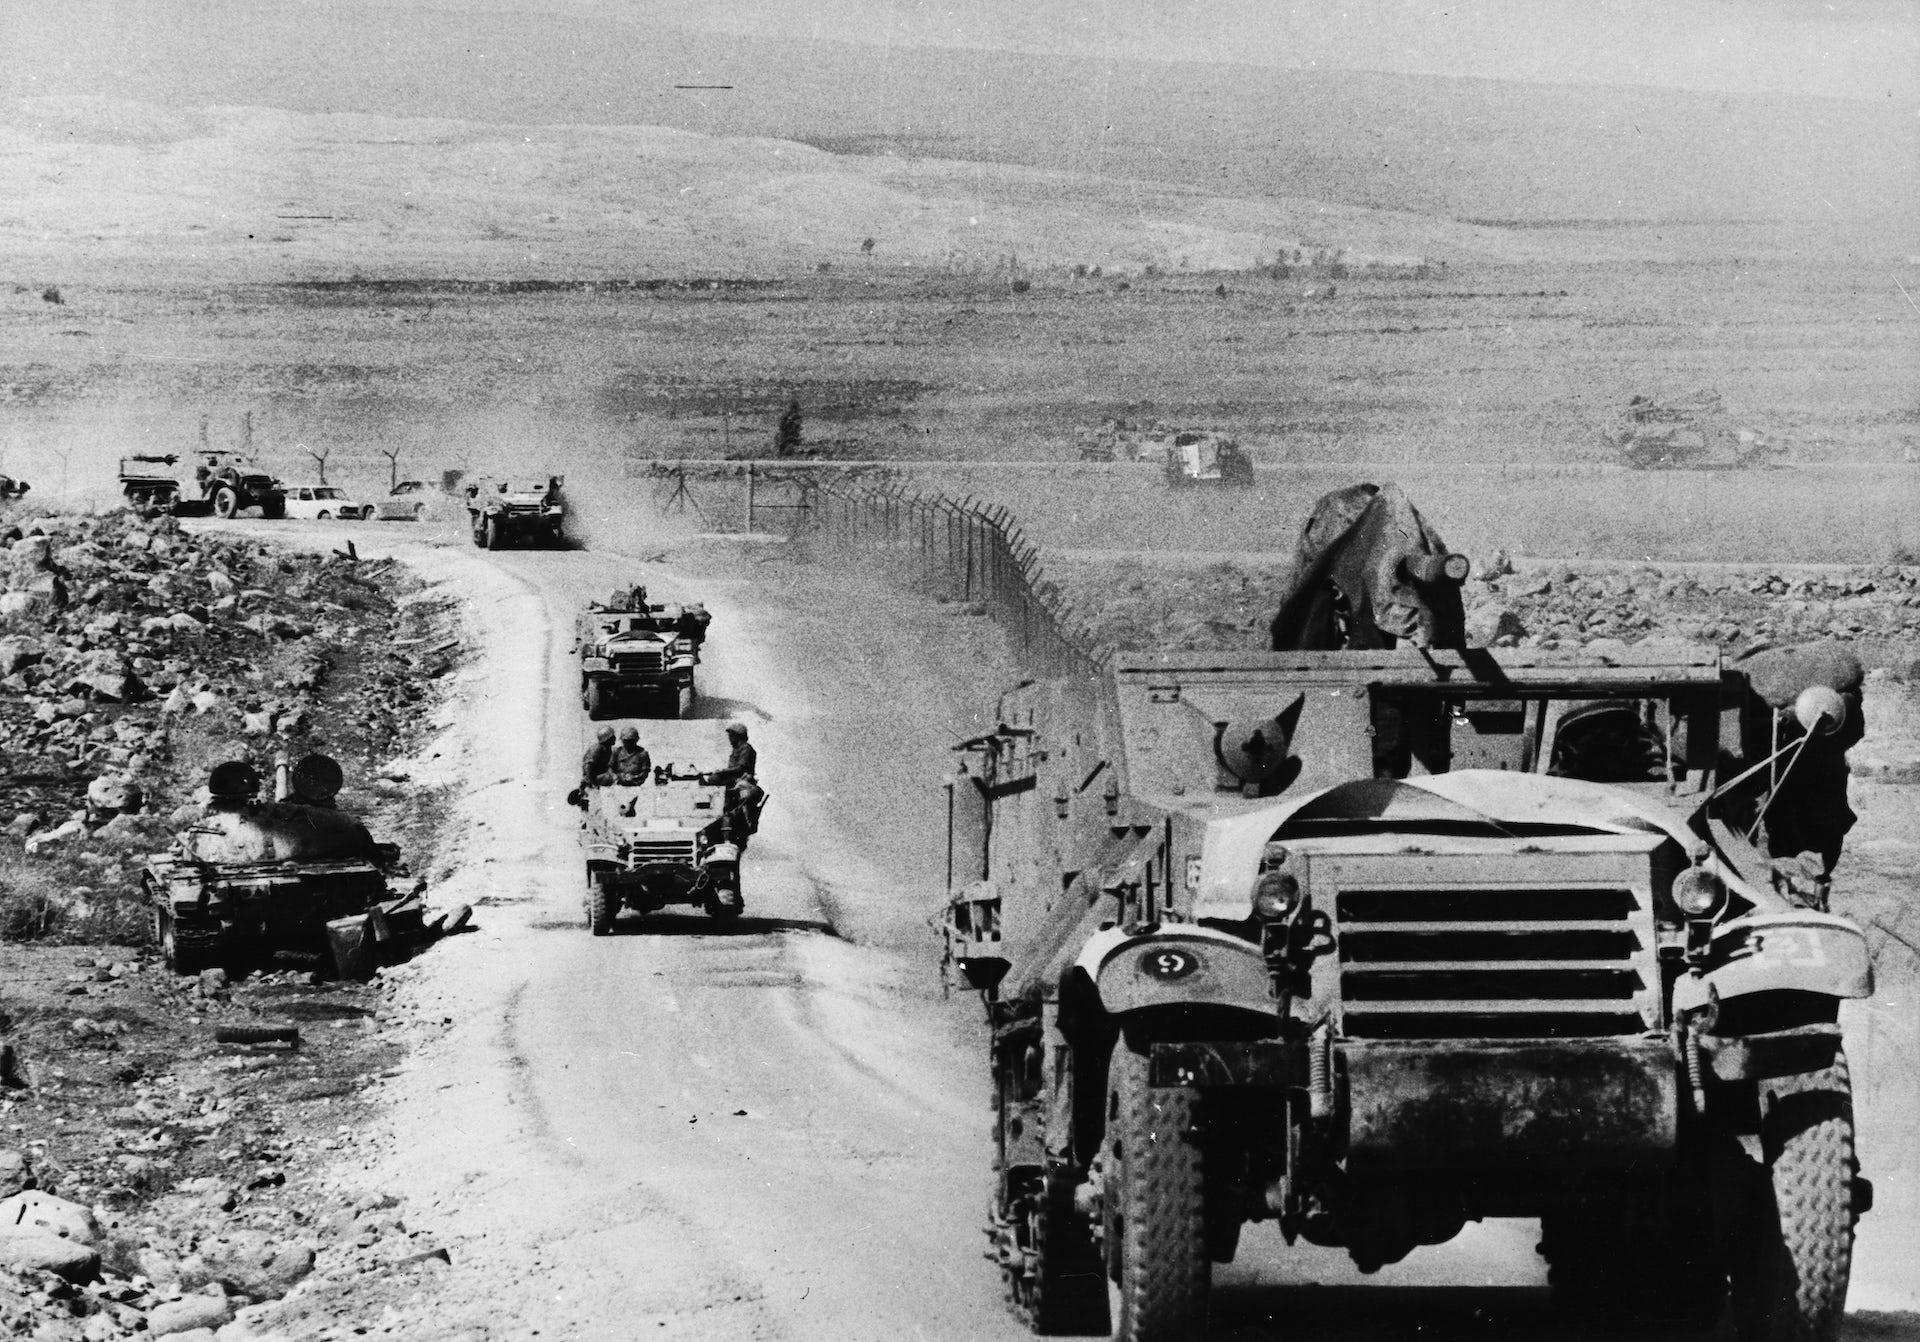 Photo showing tanks and jeeps rolling through a desert